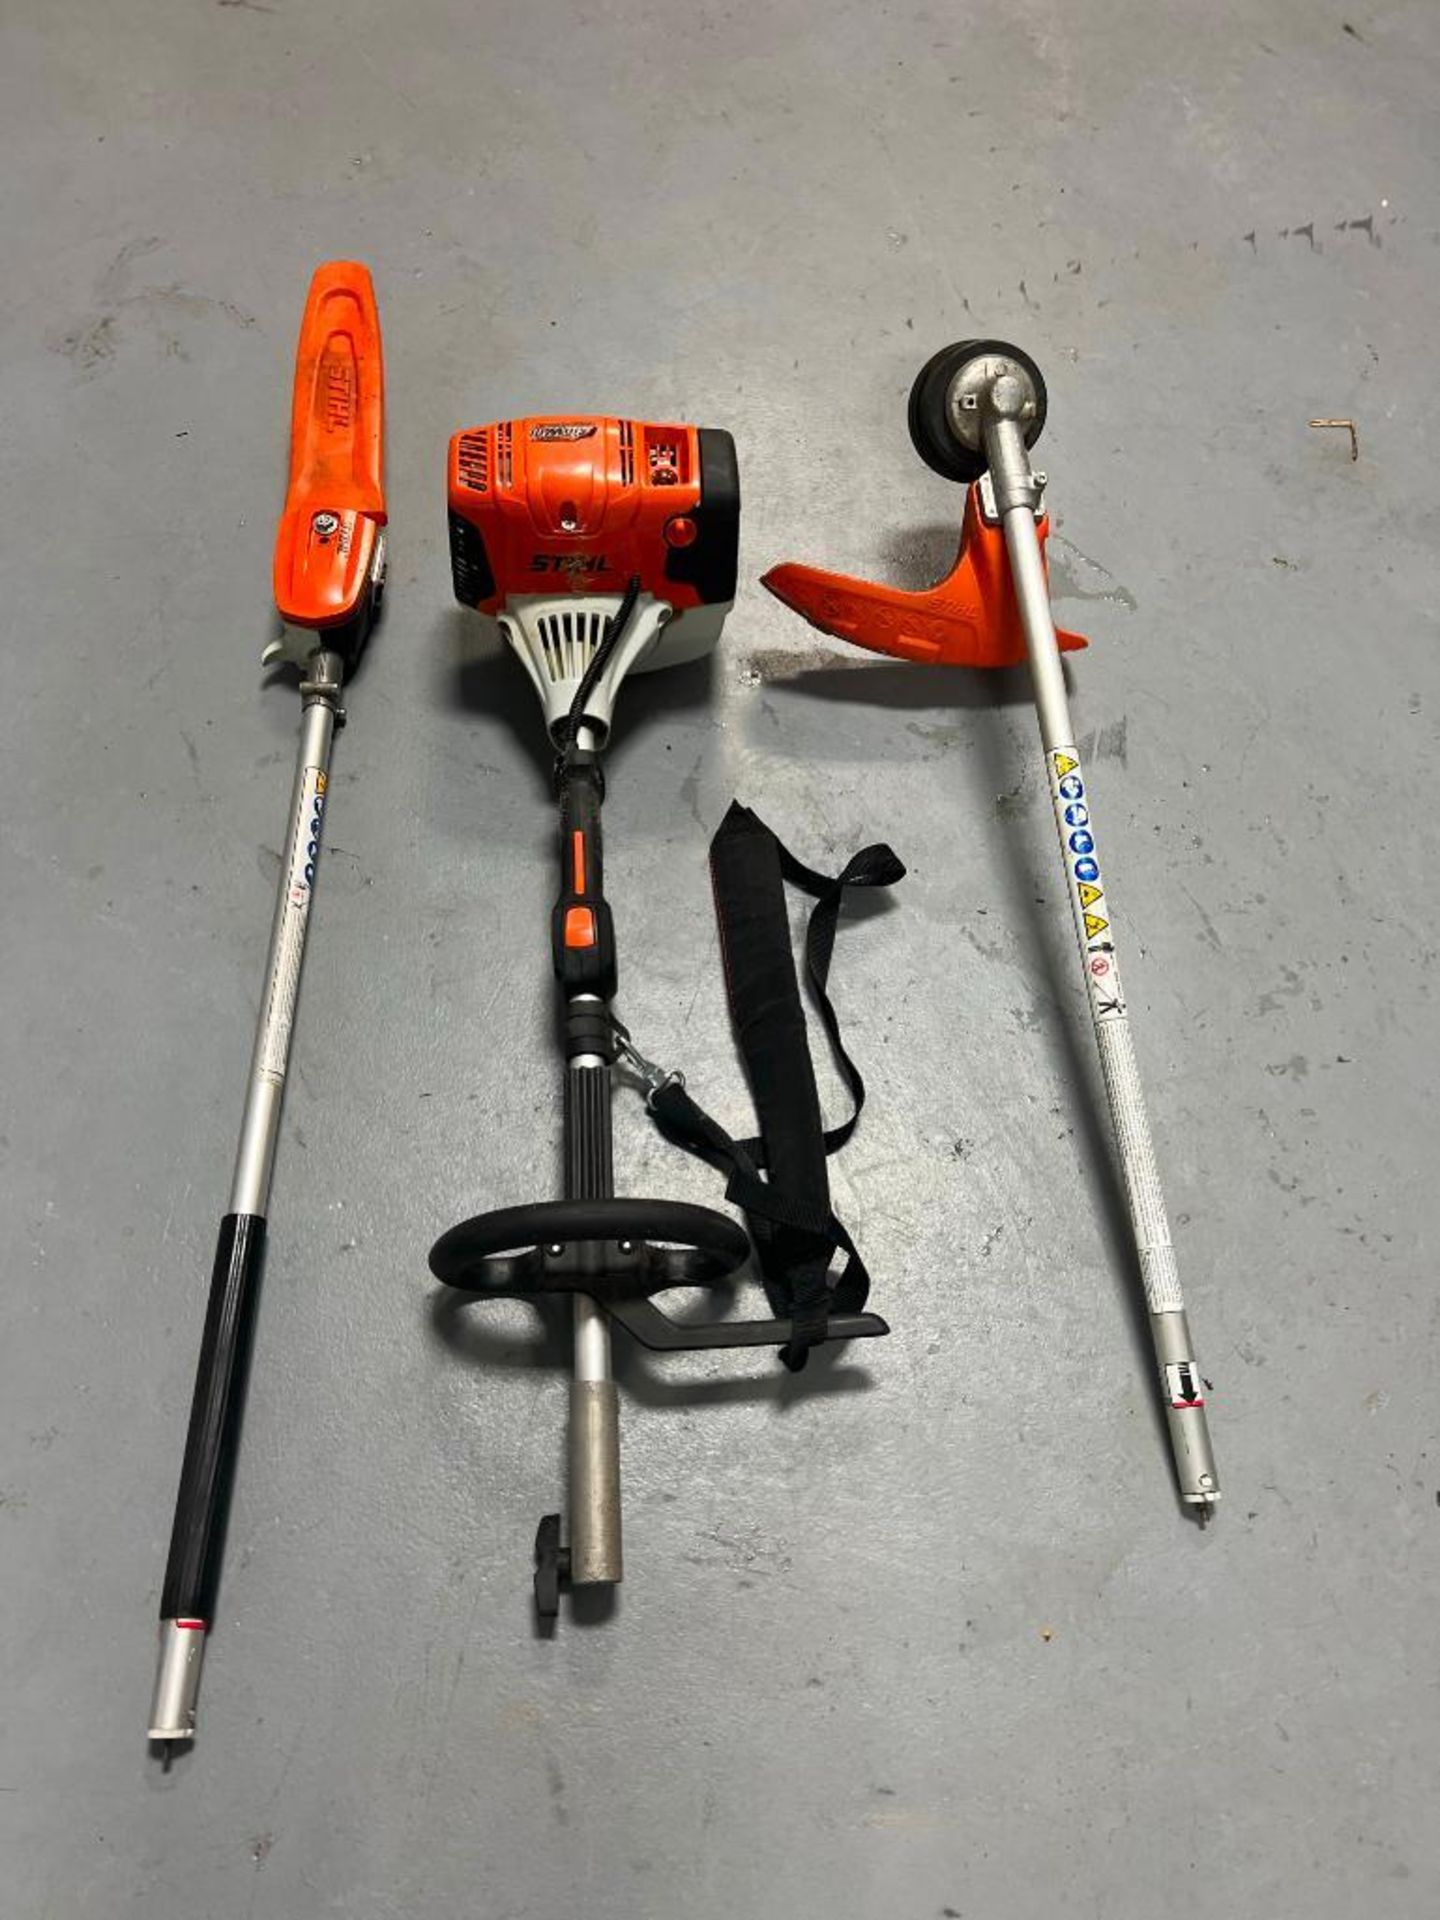 (1) Stihl KM131R with Line Head Trimmer Attachment & Long Reach Chainsaw. Located in Mt. Pleasant, I